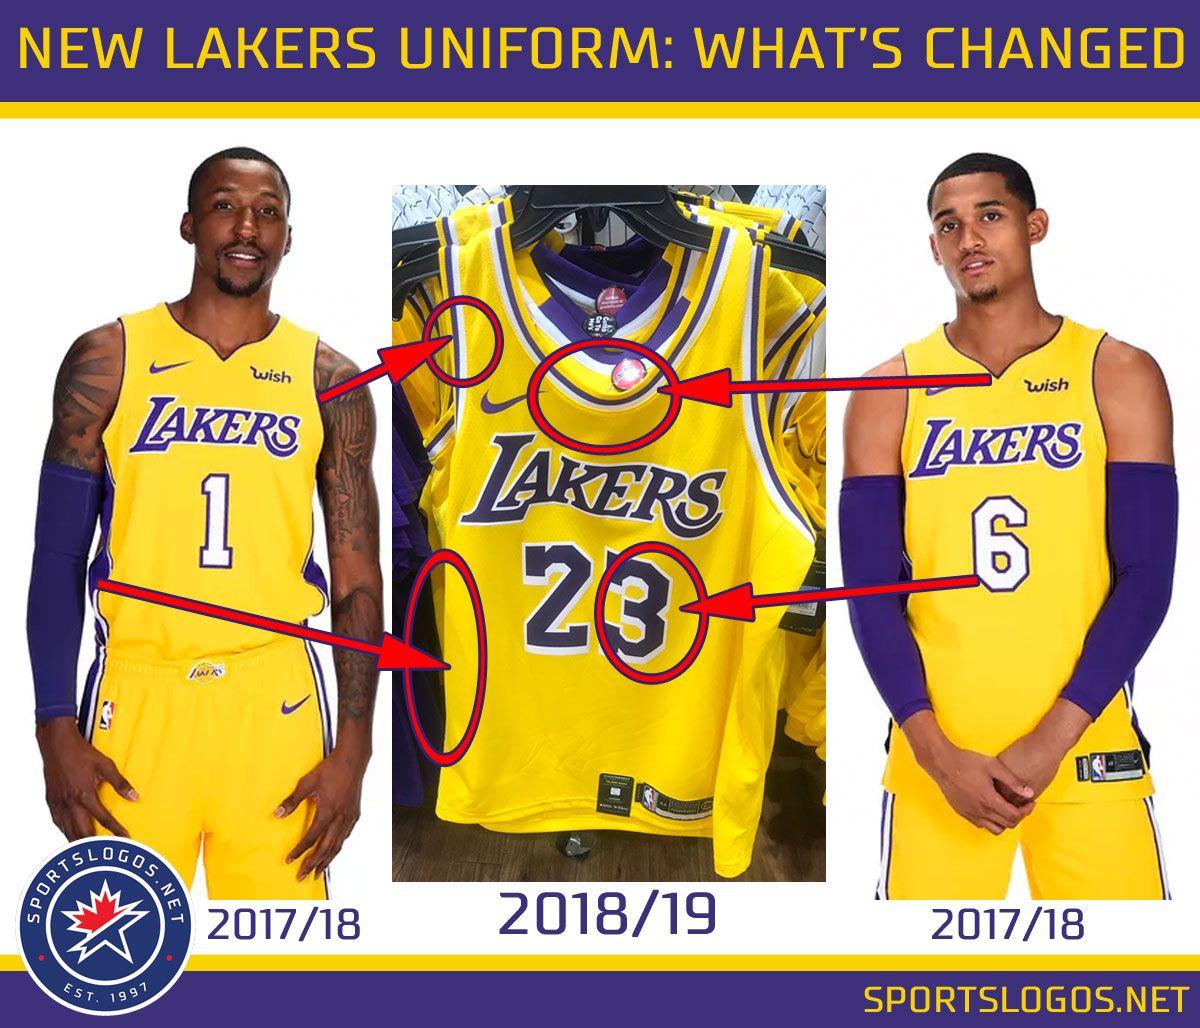 Wish On Lakers Jersey Logo - Los Angeles Lakers New Uniform 2018 2019 Compare Changes | Chris ...